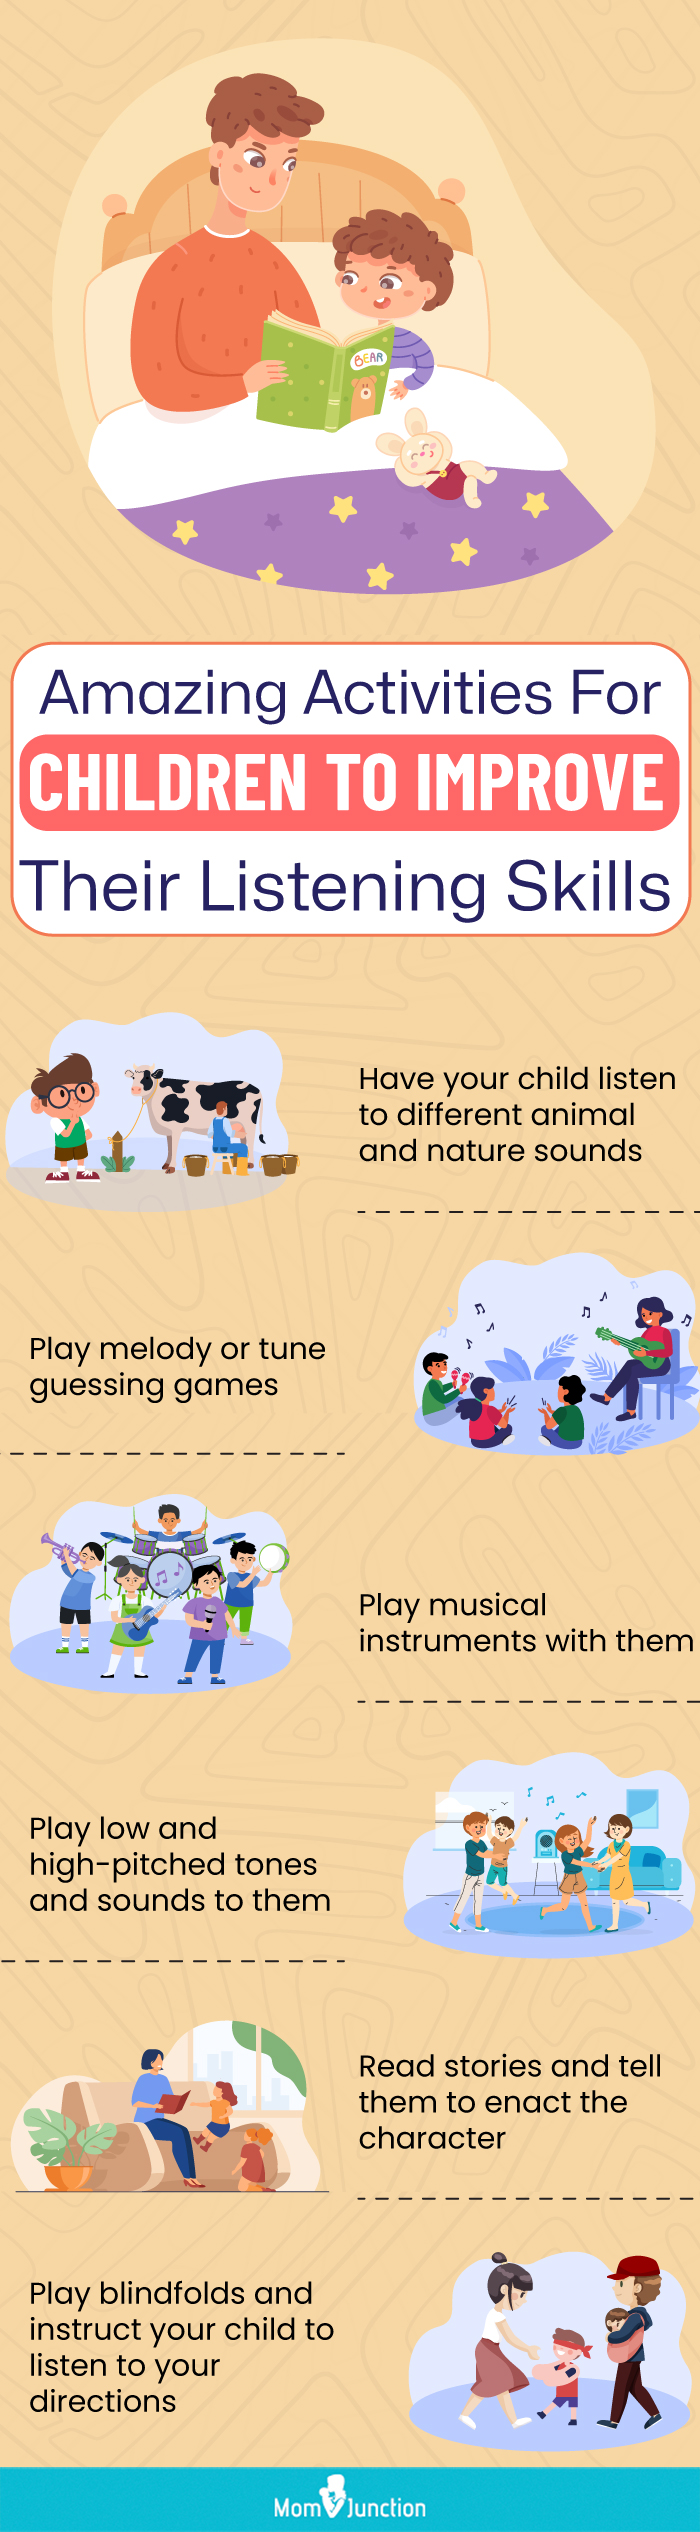 amazing activities for children to improve their listening skills (infographic)